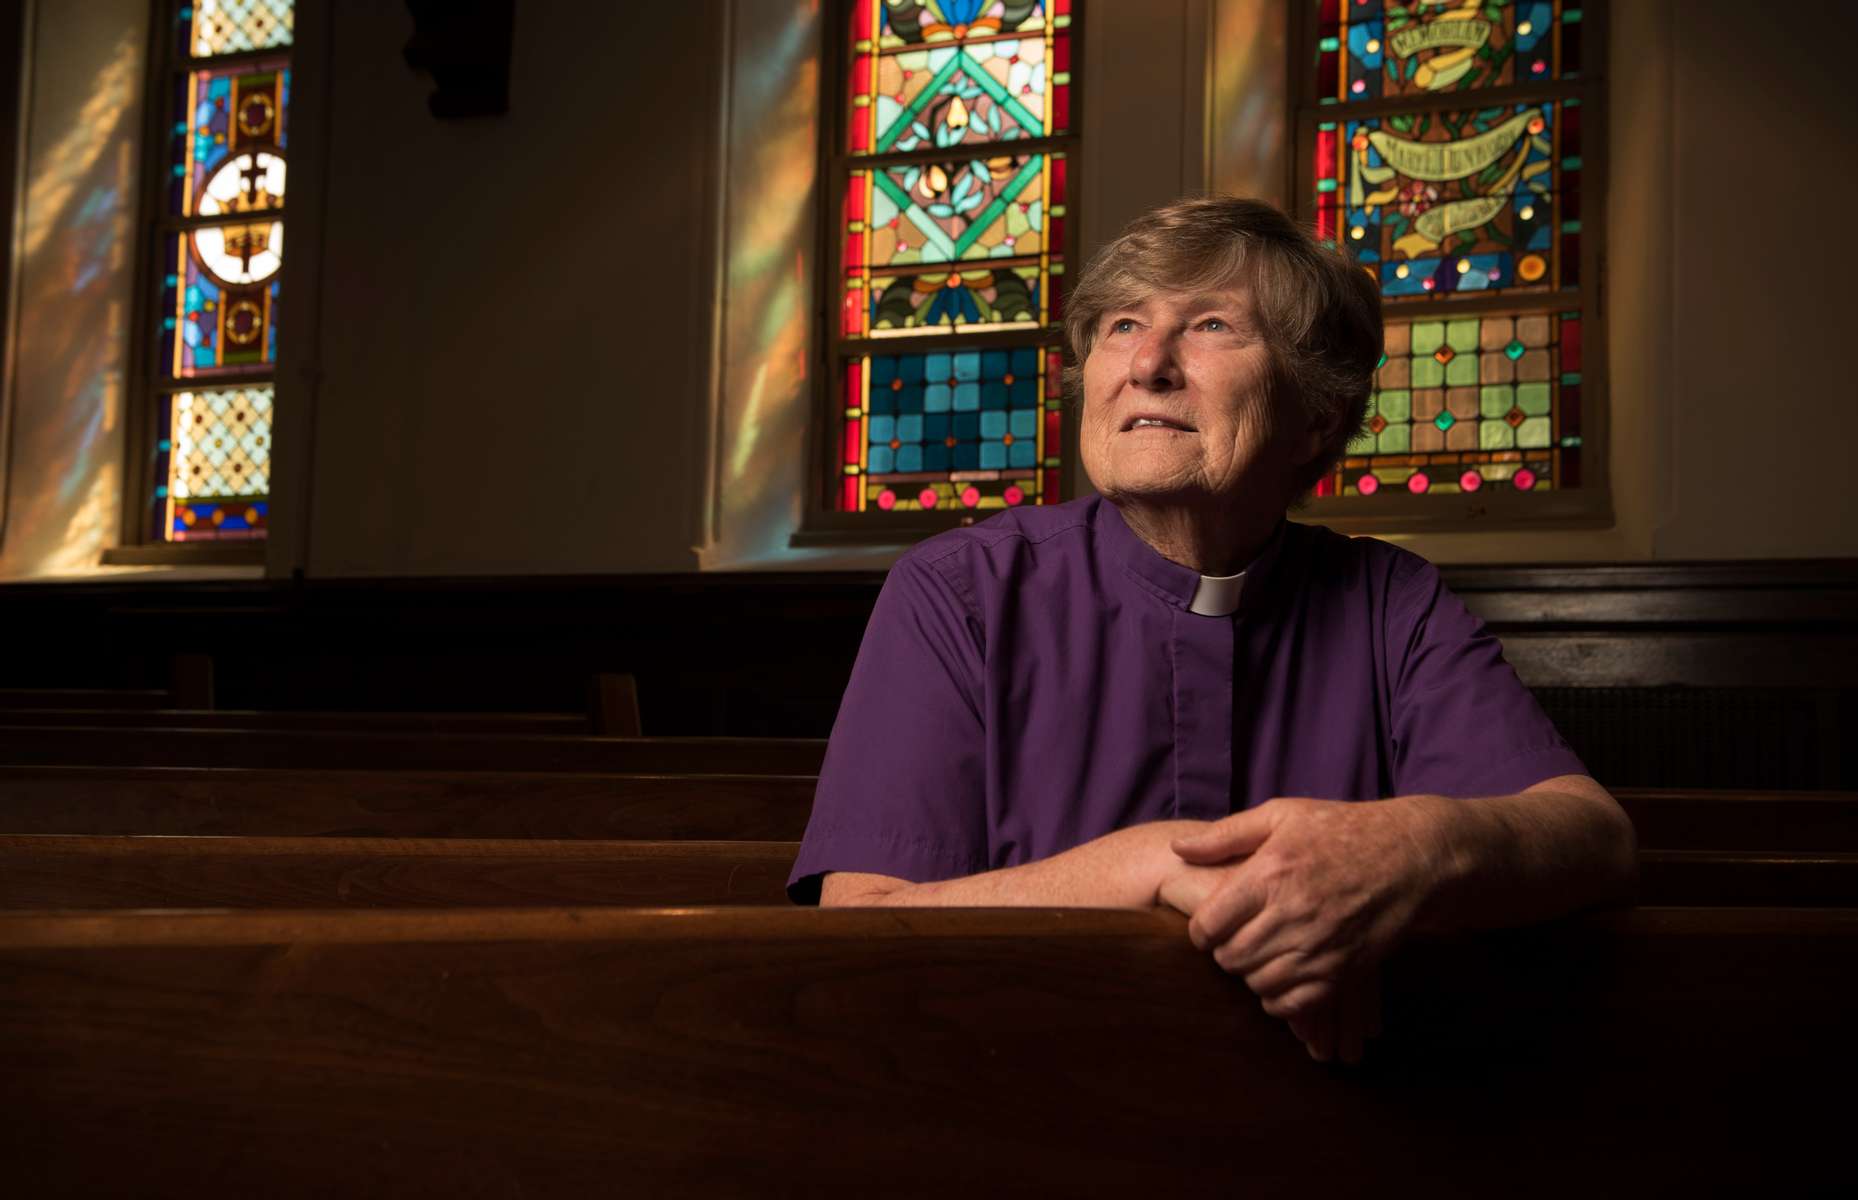 ERIN SWENSON,74,  at Central Presbyterian Chuch in Atlanta, where she attended as a teen. She broke new ground within mainstream Christian Protestant faith groups in 1996, when the Presbytery of Greater Atlanta, by a vote of 186 to 161, sustained her ordination as a Presbyterian minister. Erin had transitioned from male to female that year after 23 years of ordained service, and with the Presbytery’s vote in 1996 she became the first mainstream minister in the U.S. to make a gender transition while remaining in ordained office.